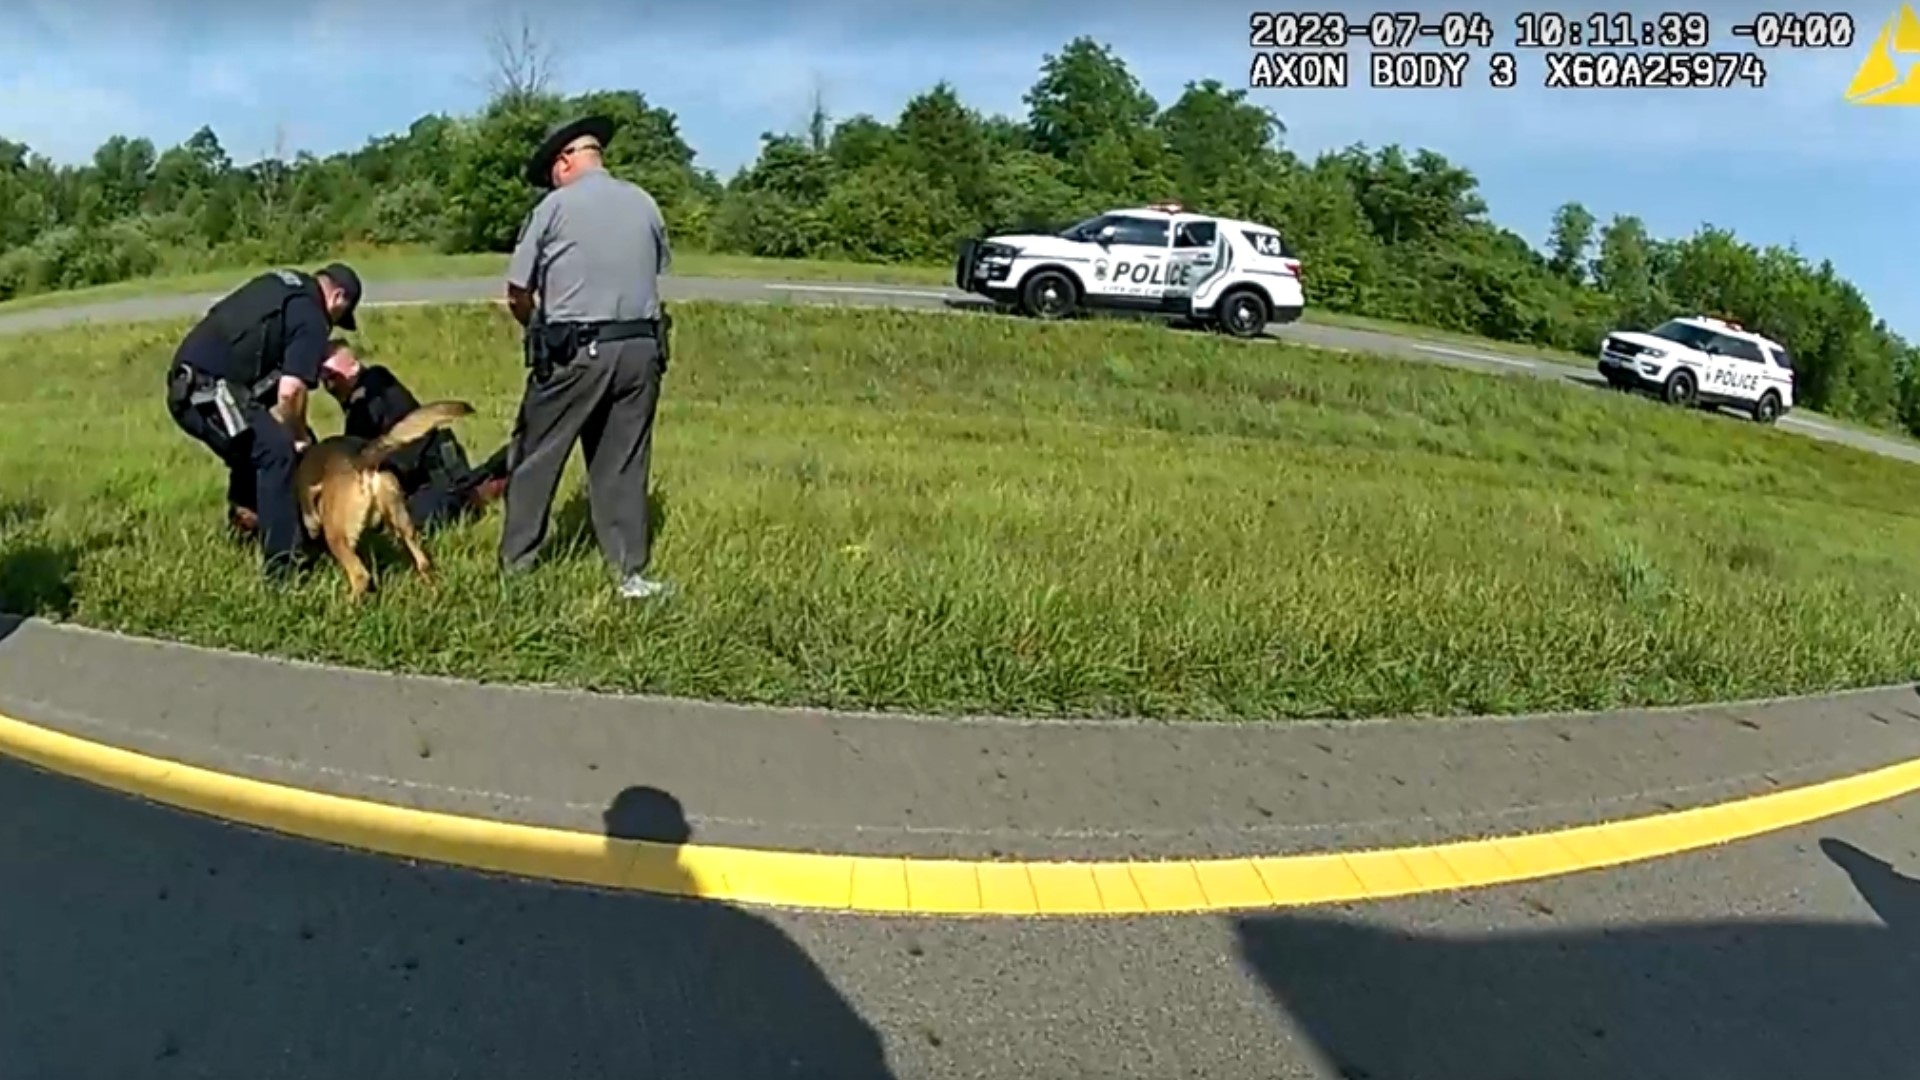 New body camera footage shows the moment a police K9 is unleashed on a Memphis truck driver with his hands in the air in Ohio.